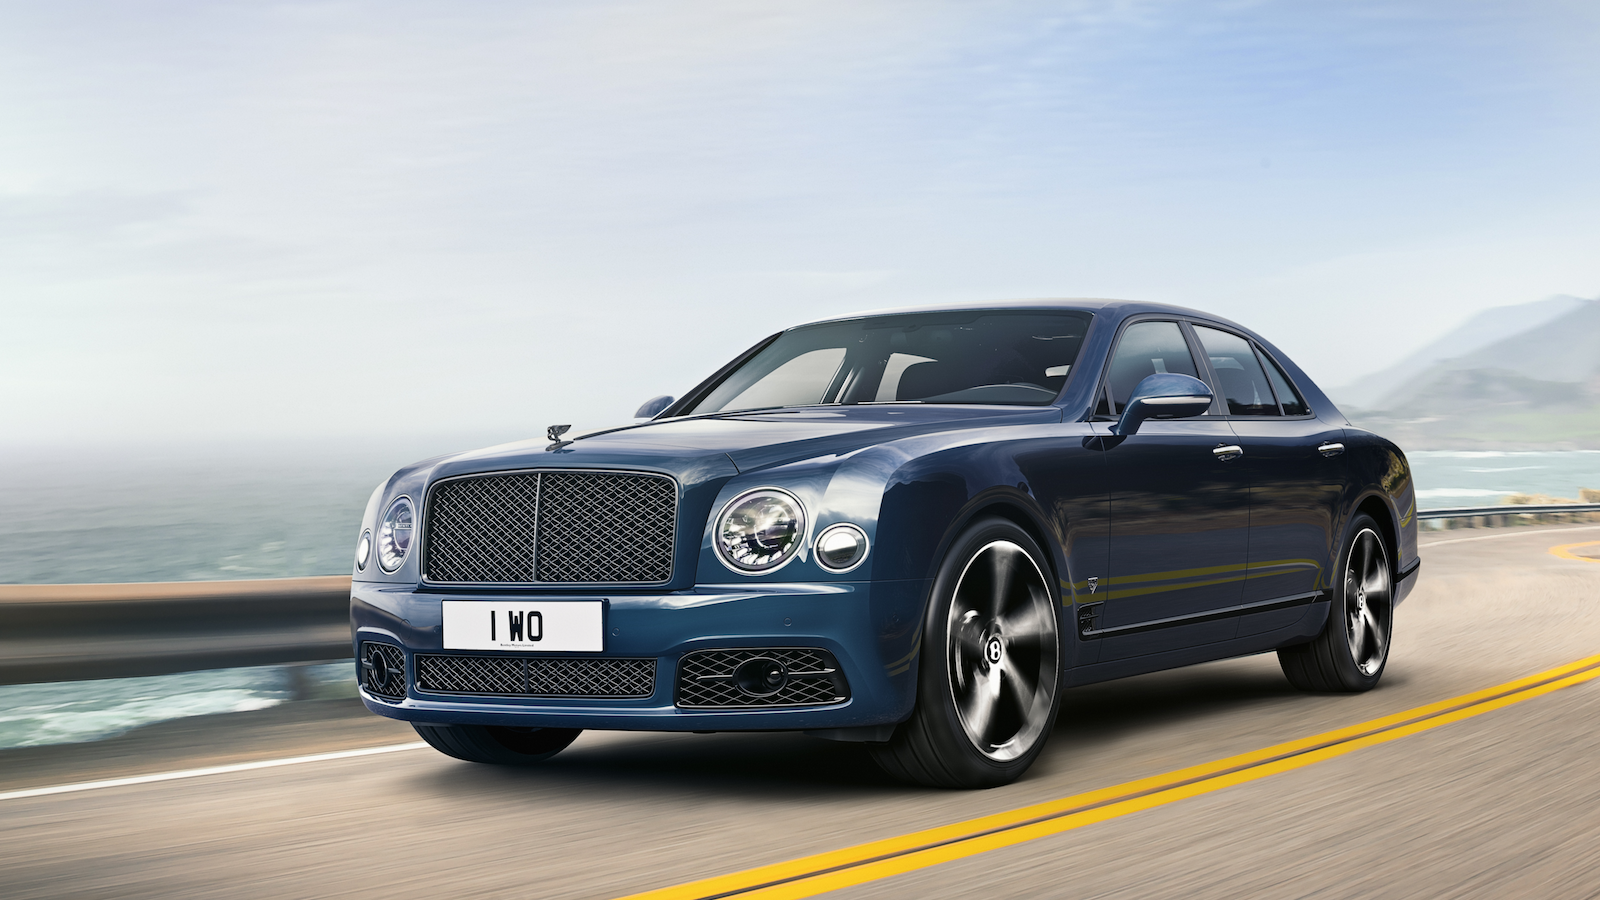 Bentley’s V8 bows out